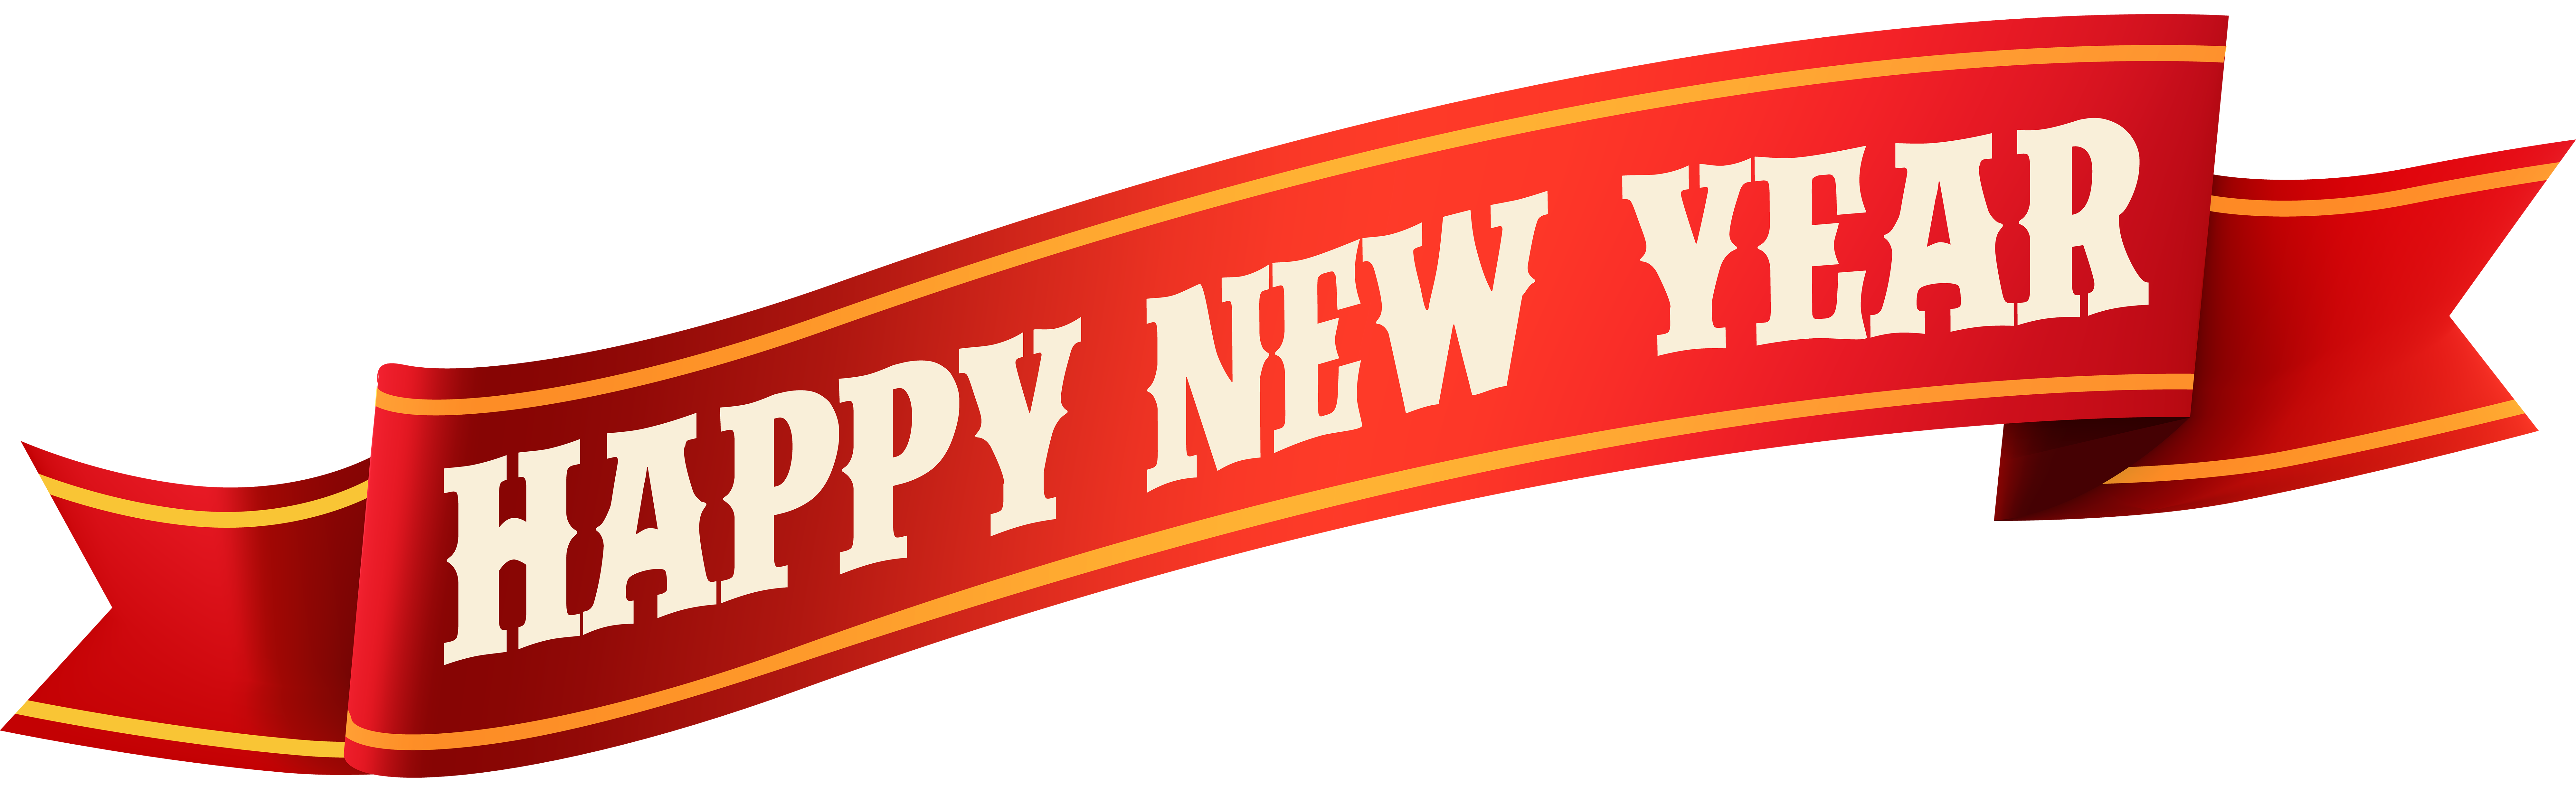 New Years Day New Years Eve - Happy New Year PNG Clip Art png download